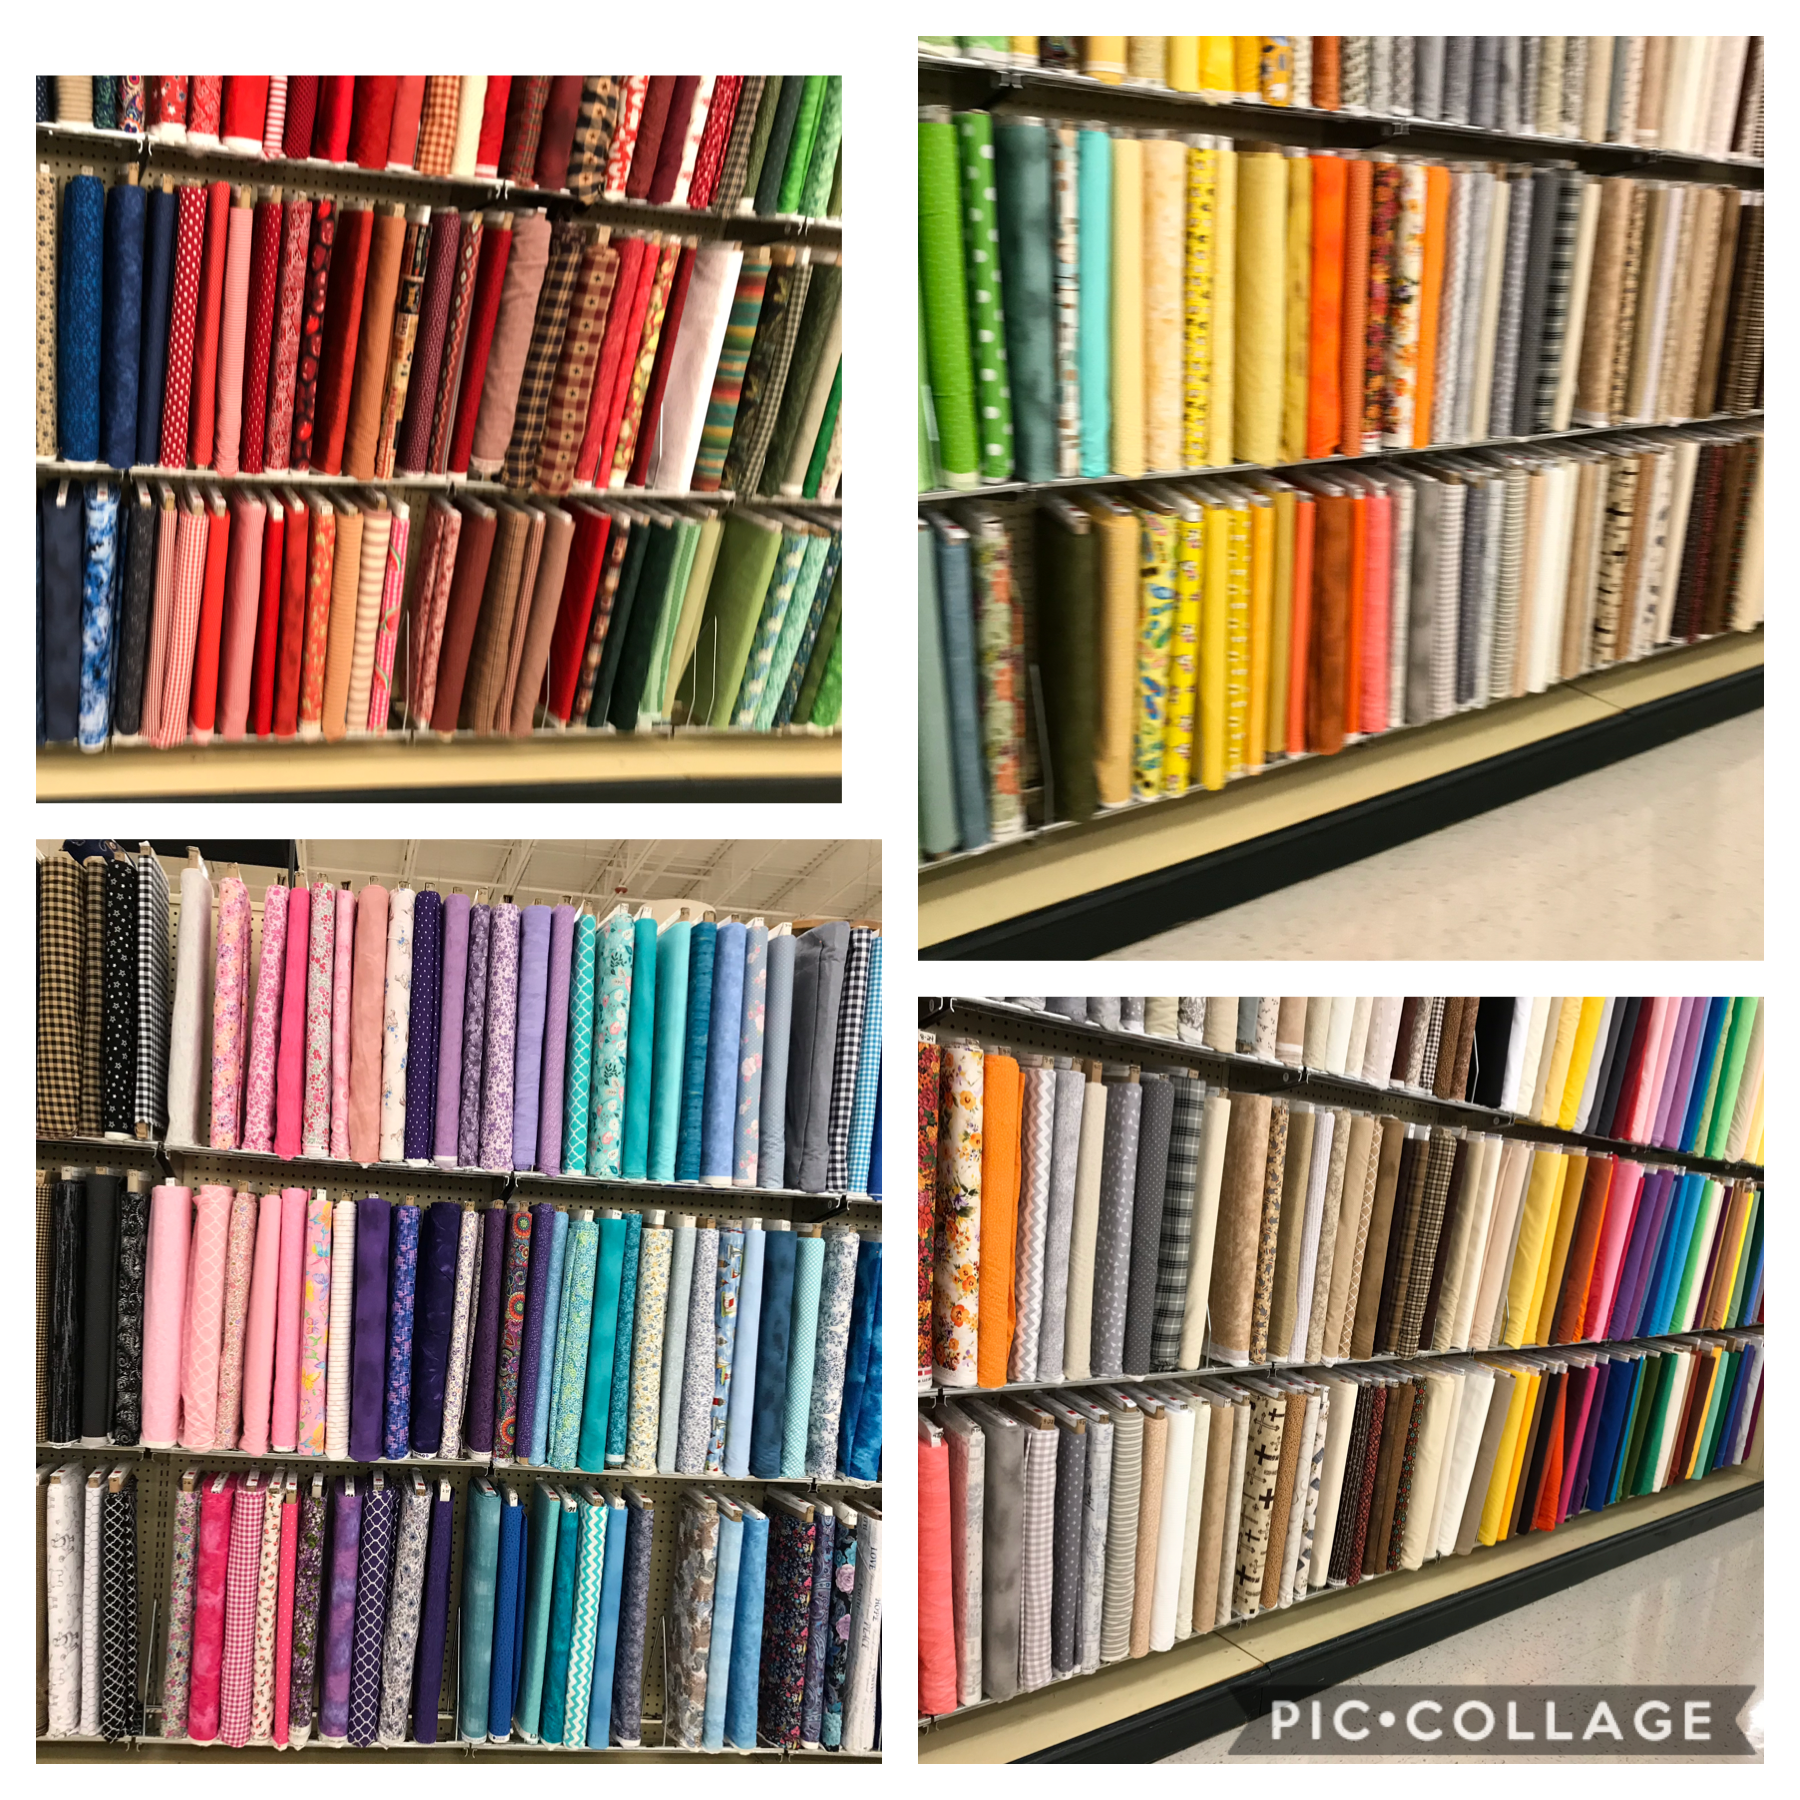 I went to a fabric store and thought this was cool how they put it in order.